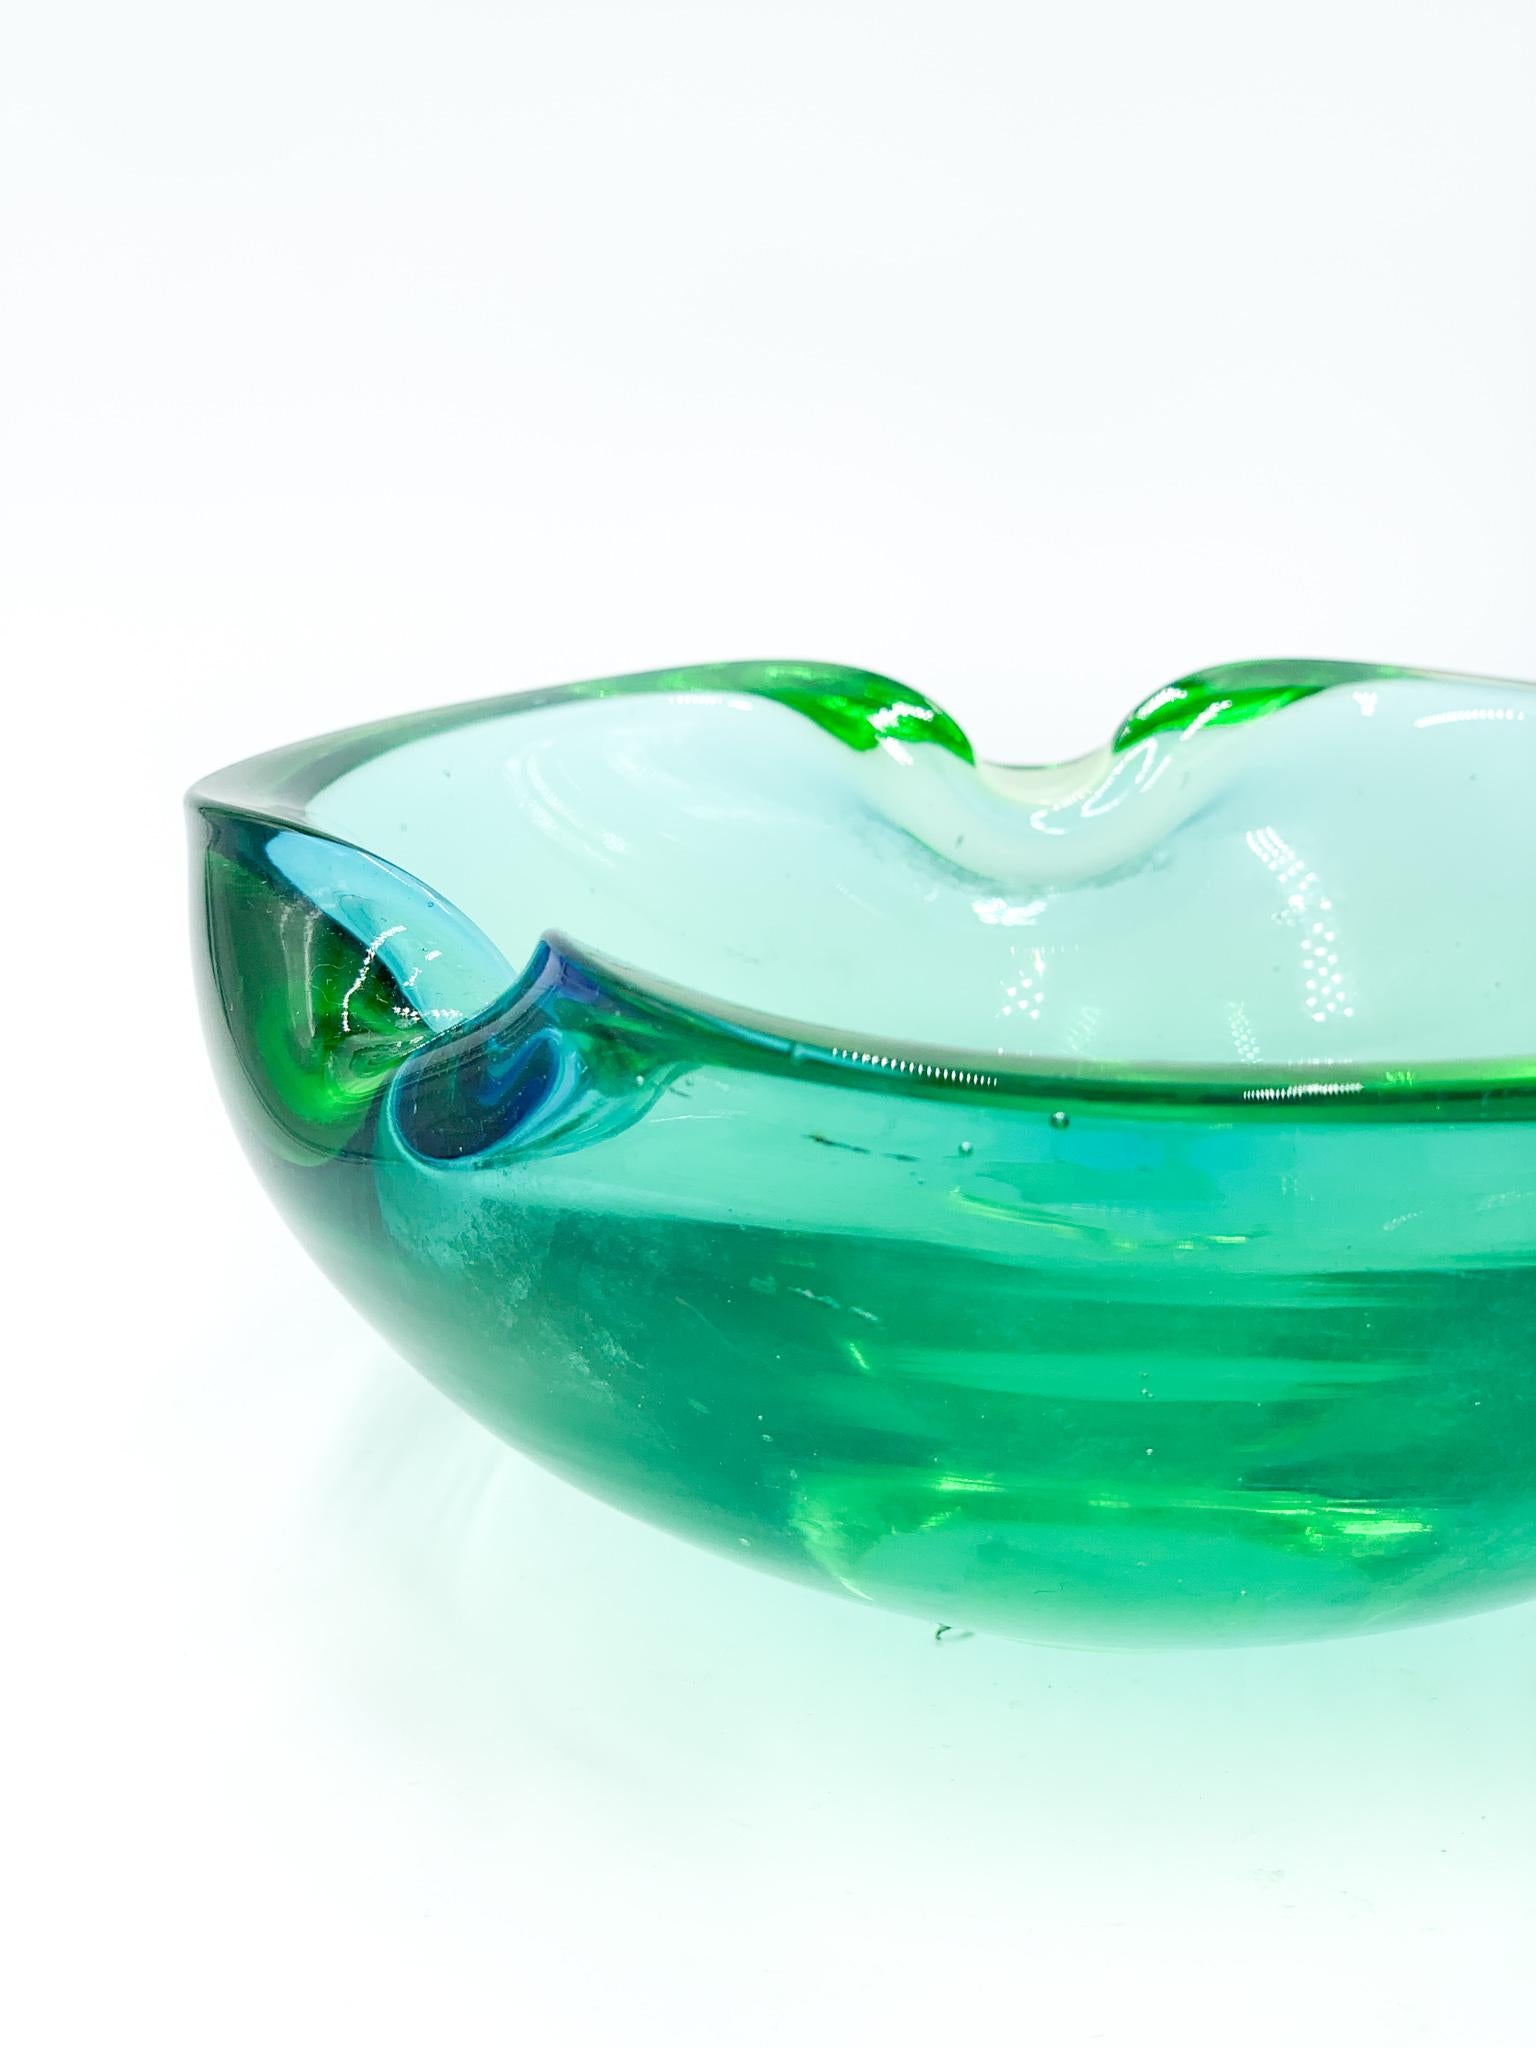 Mid-Century Modern Green Murano Glass Ashtray with Blue Shades by Flavio Poli 1960s For Sale